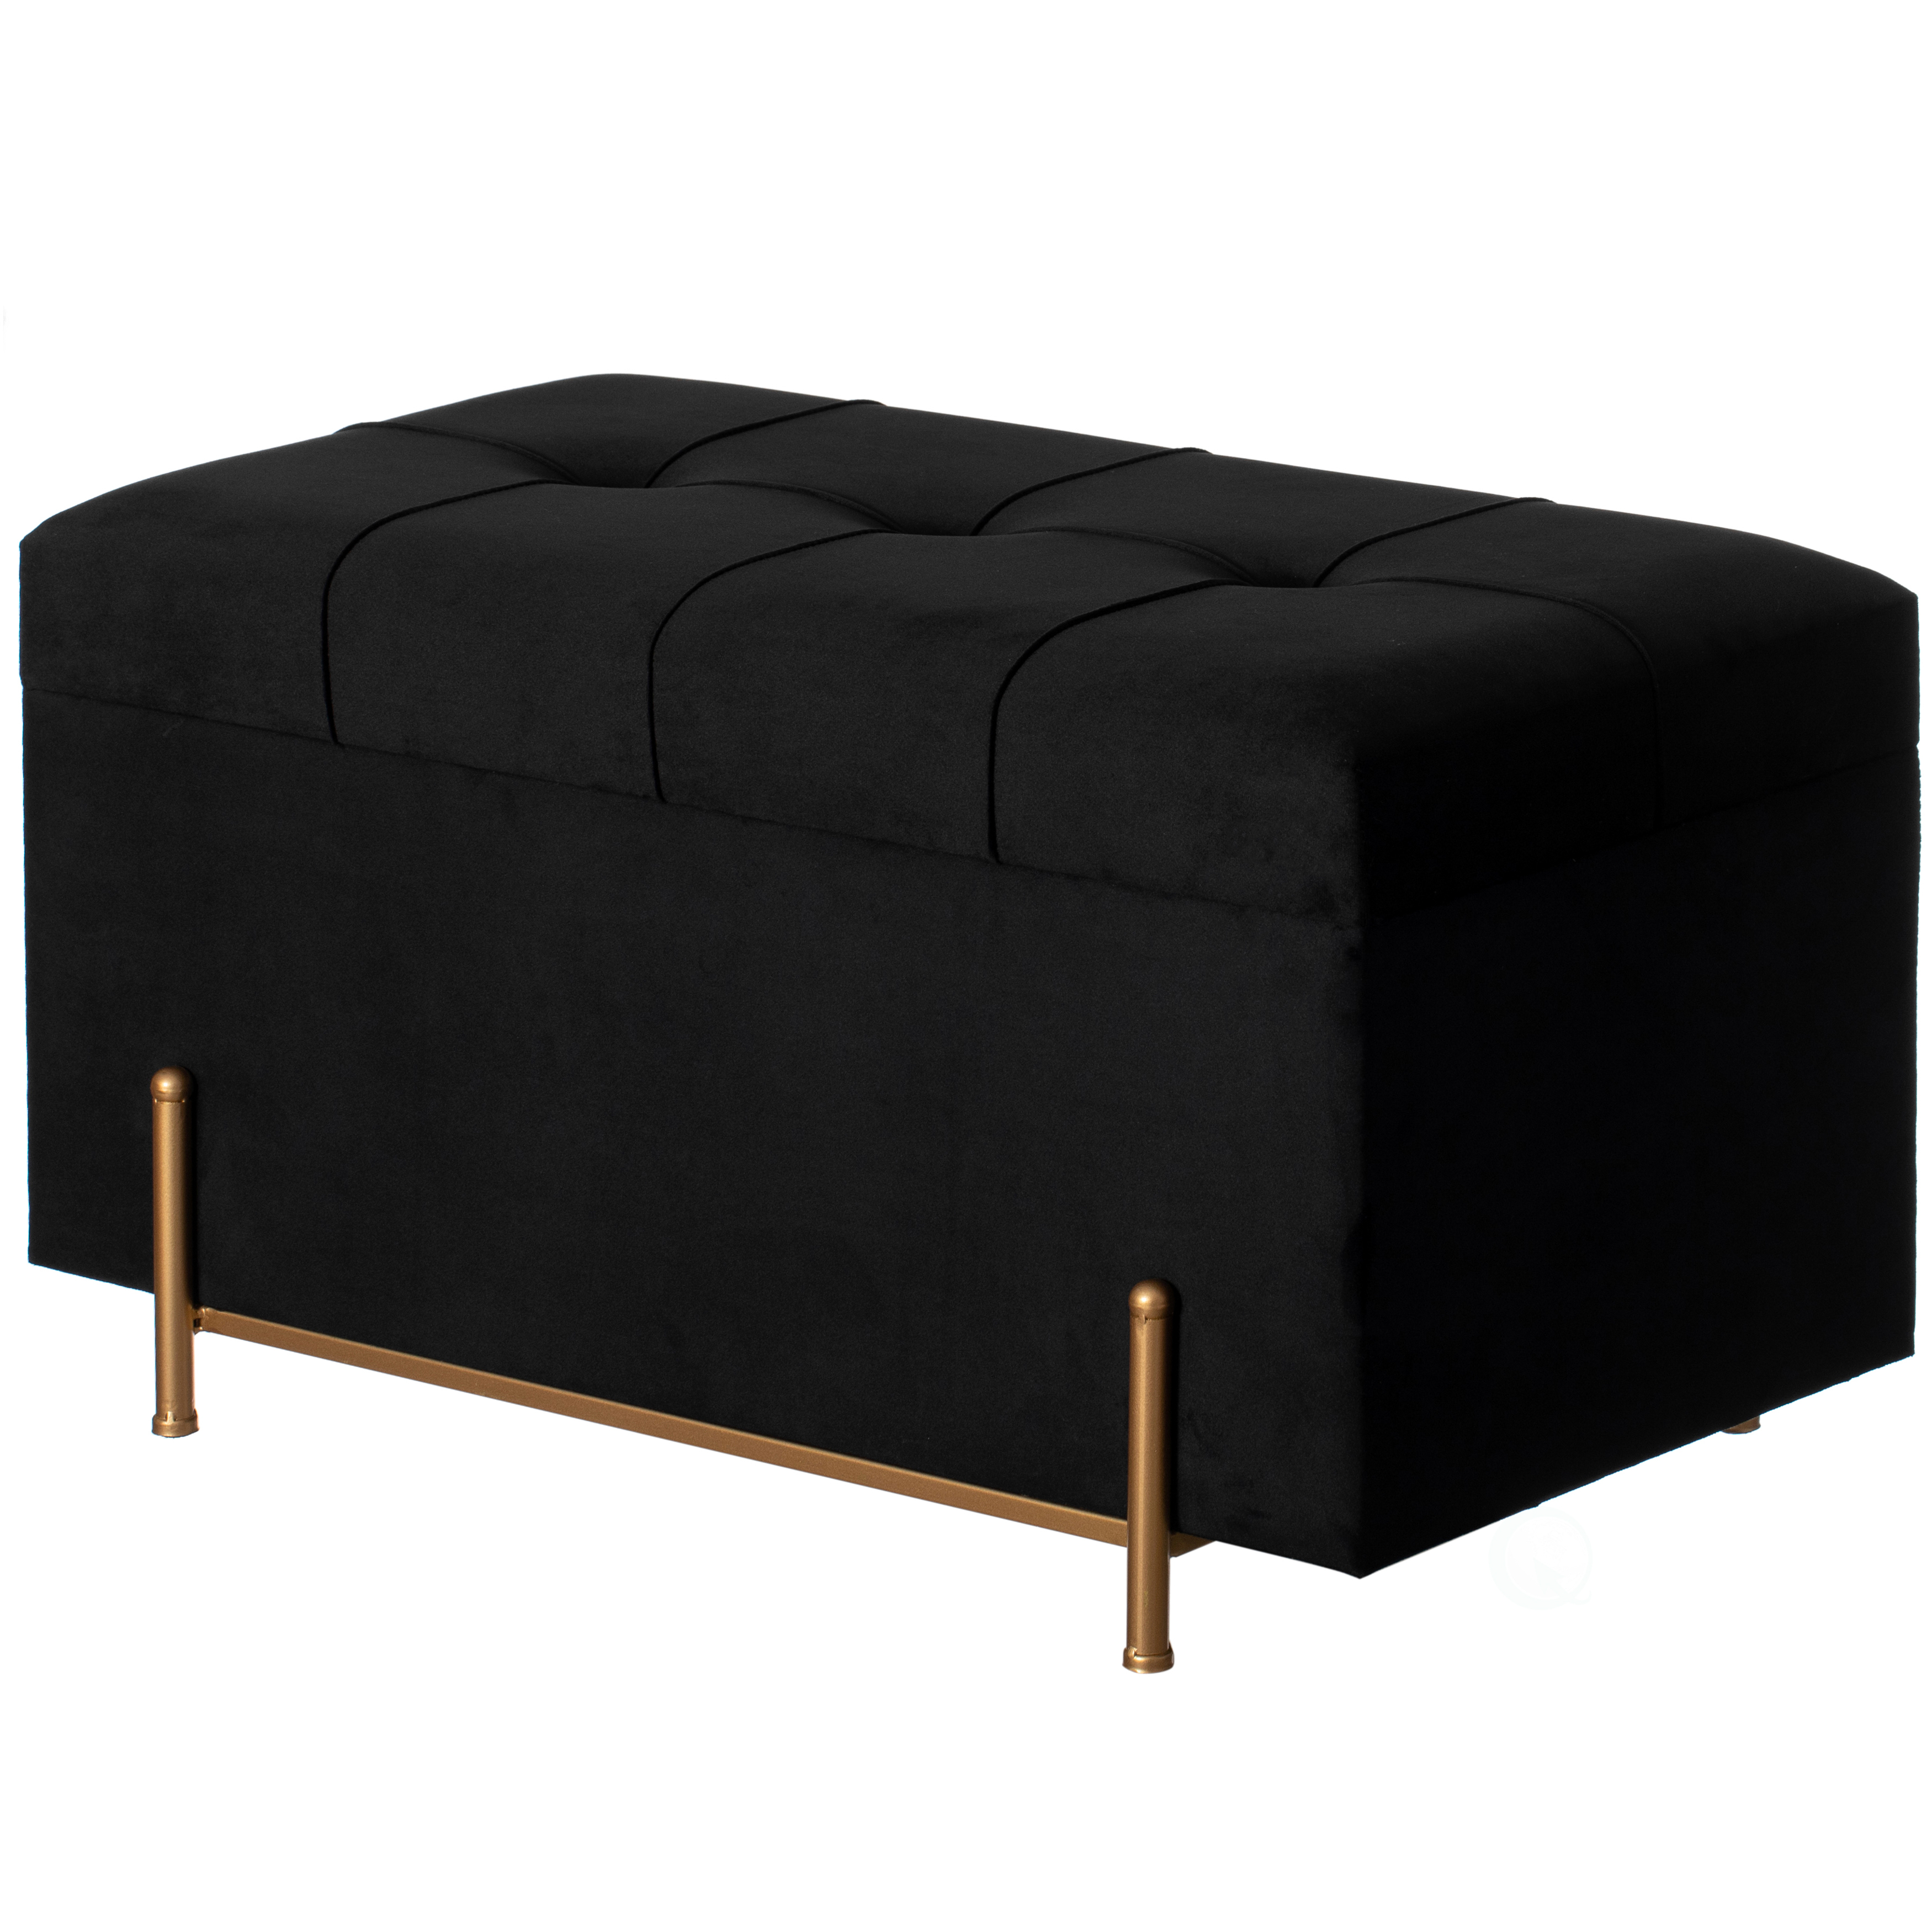 Large Rectangle Velvet Storage Ottoman Stool Box With Golden Legs Decorative Sitting Bench For Living Room Home Decor - Gray